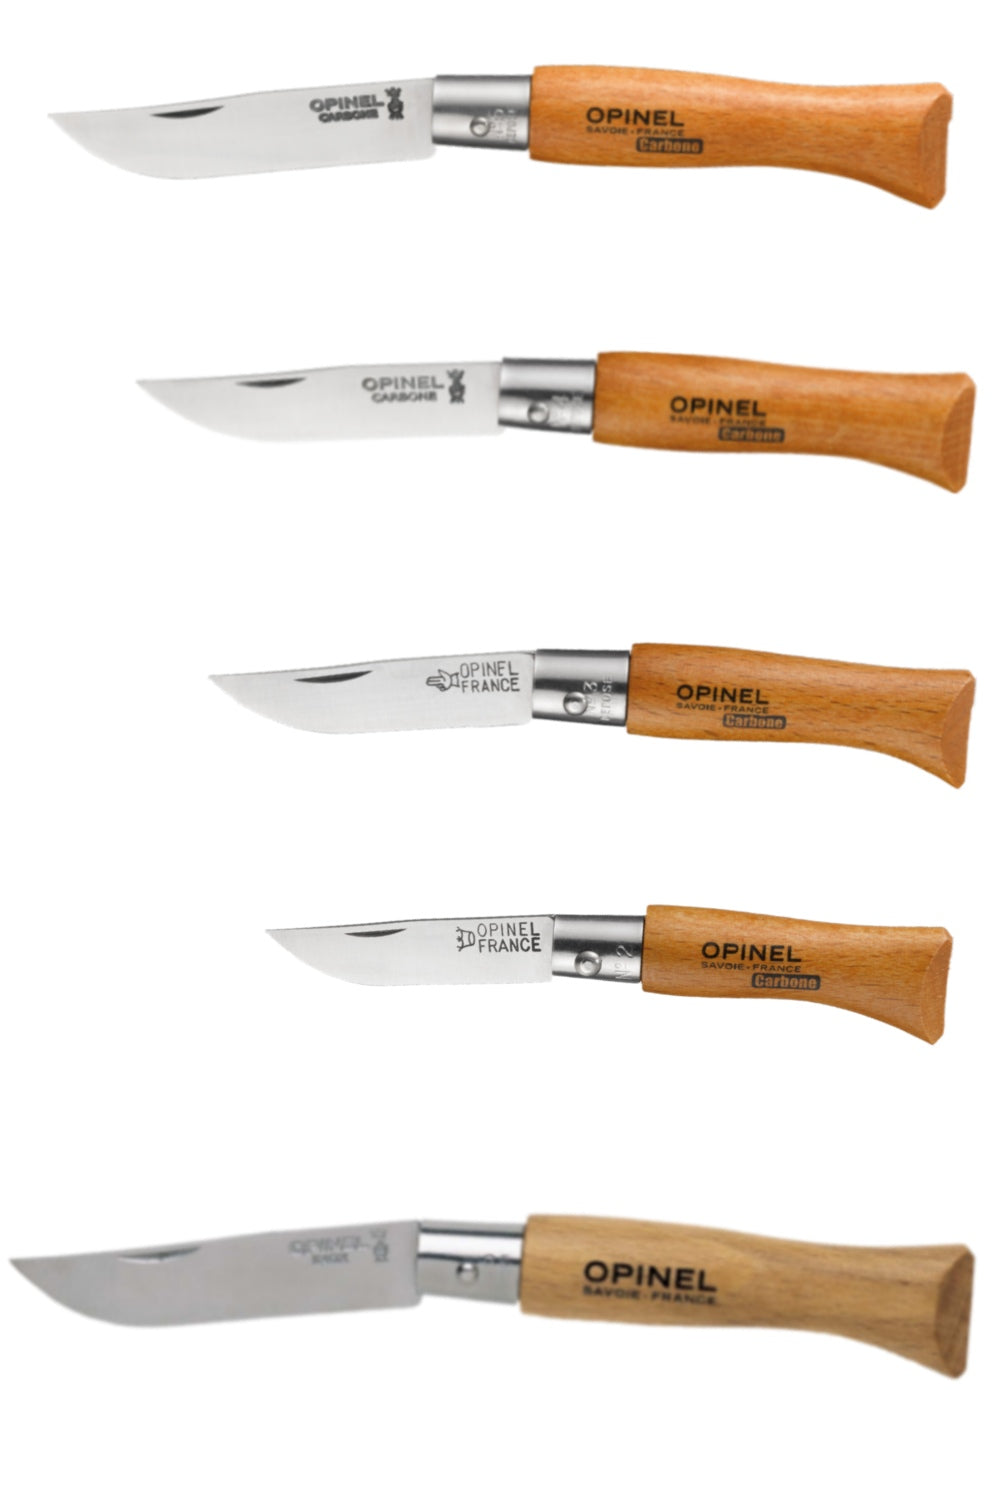 Opinel Classic Originals Non Locking Knife in Carbon, Stainless Steel